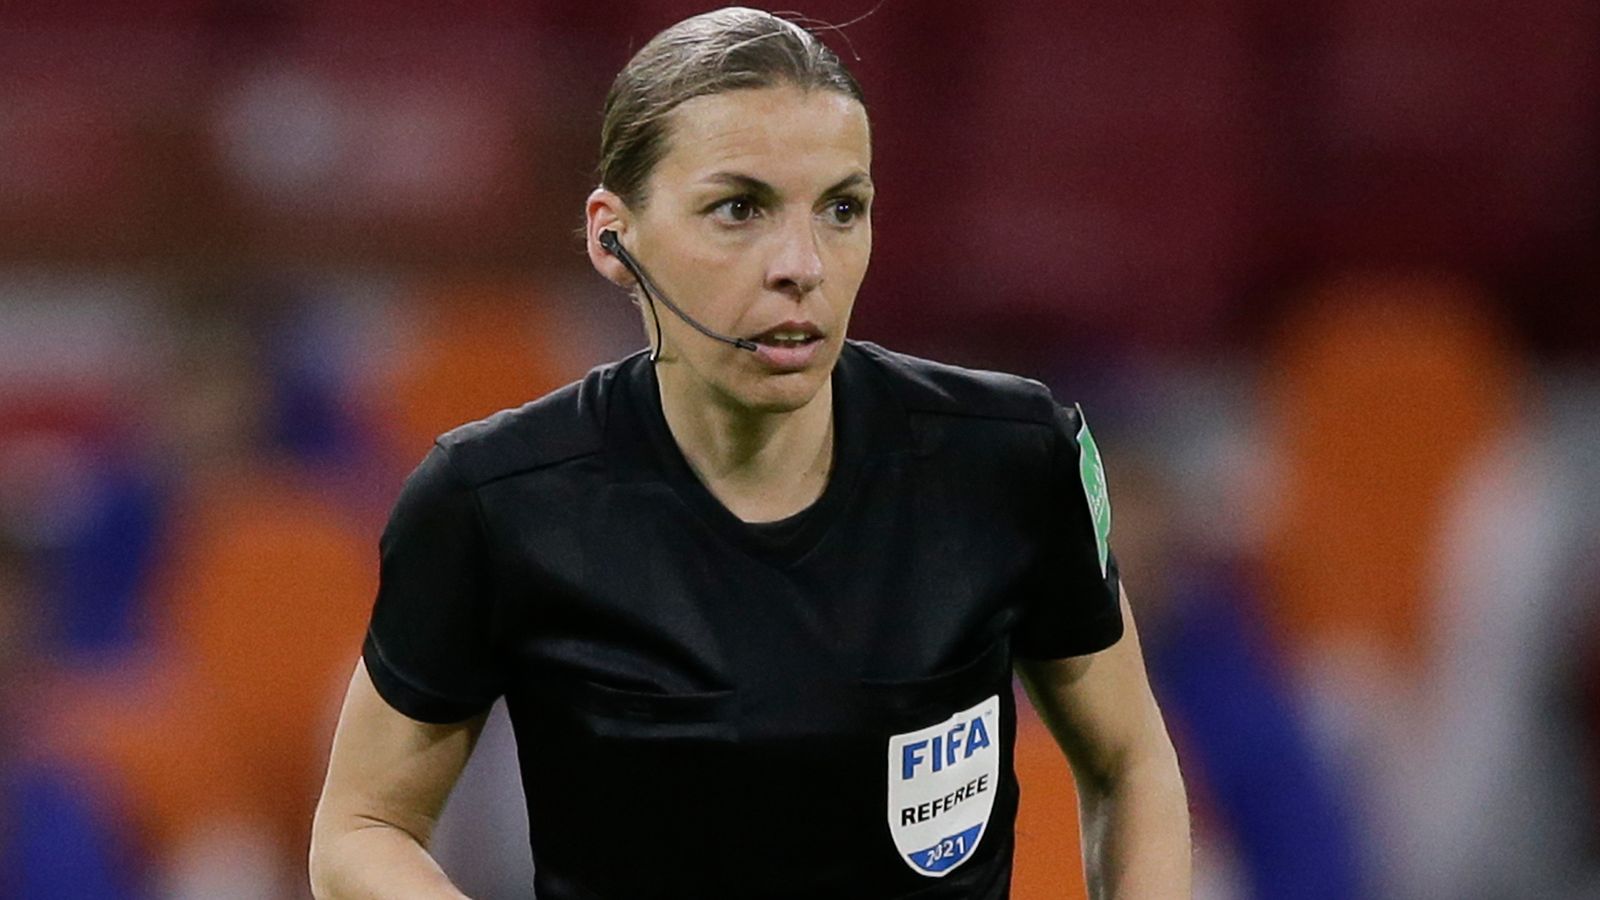 Qatar World Cup to feature three female referees with Premier League's